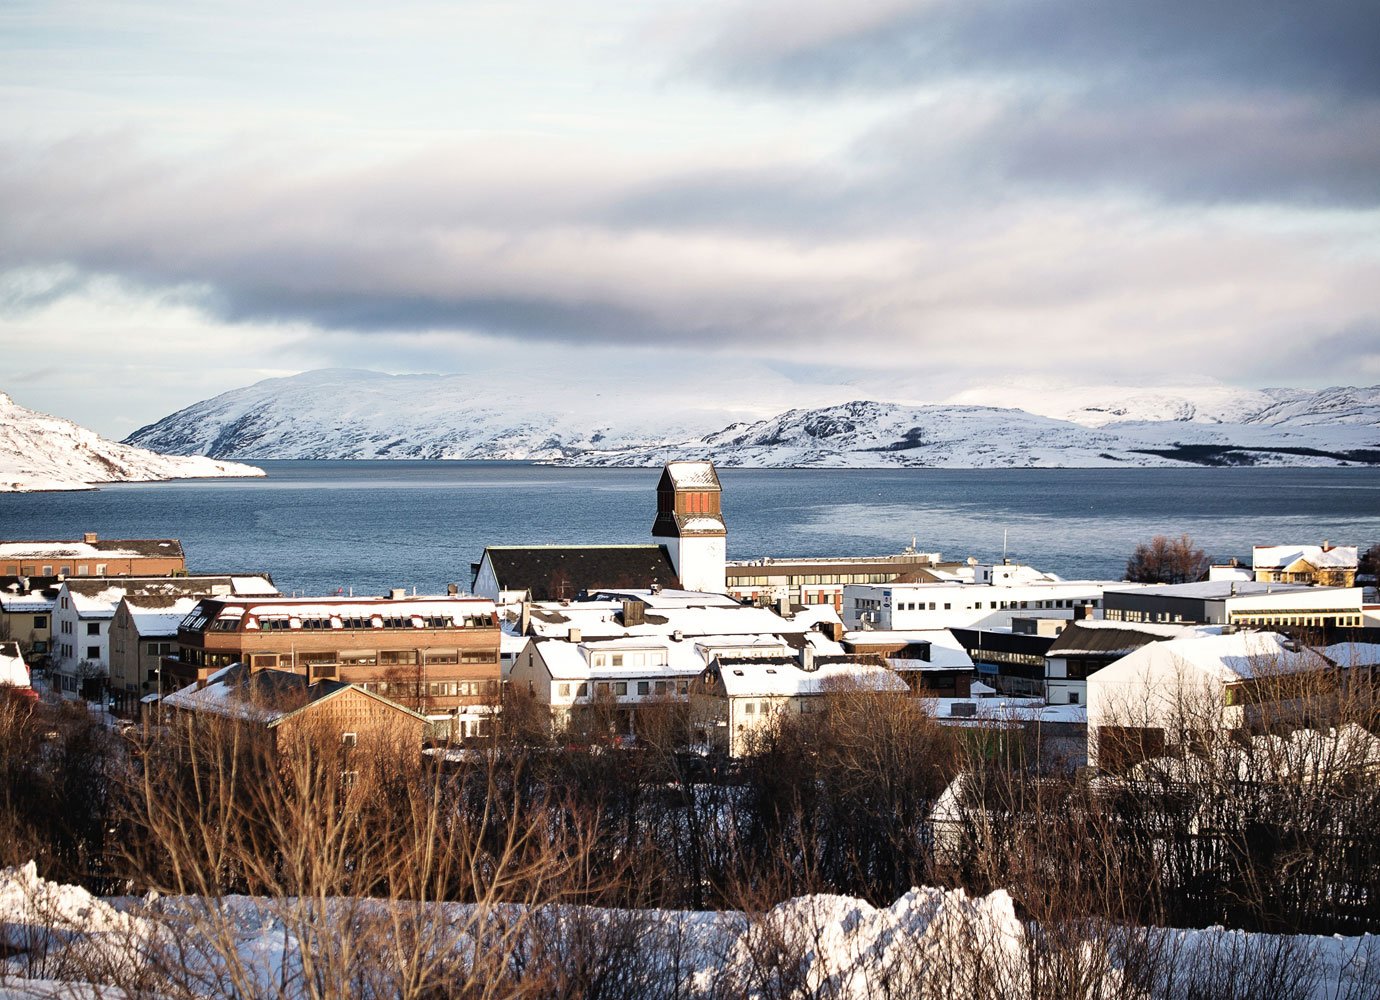 Letter from Boris Gleb: Owen Hatherley uncovers the peculiar history of a Soviet enclave in Norway 